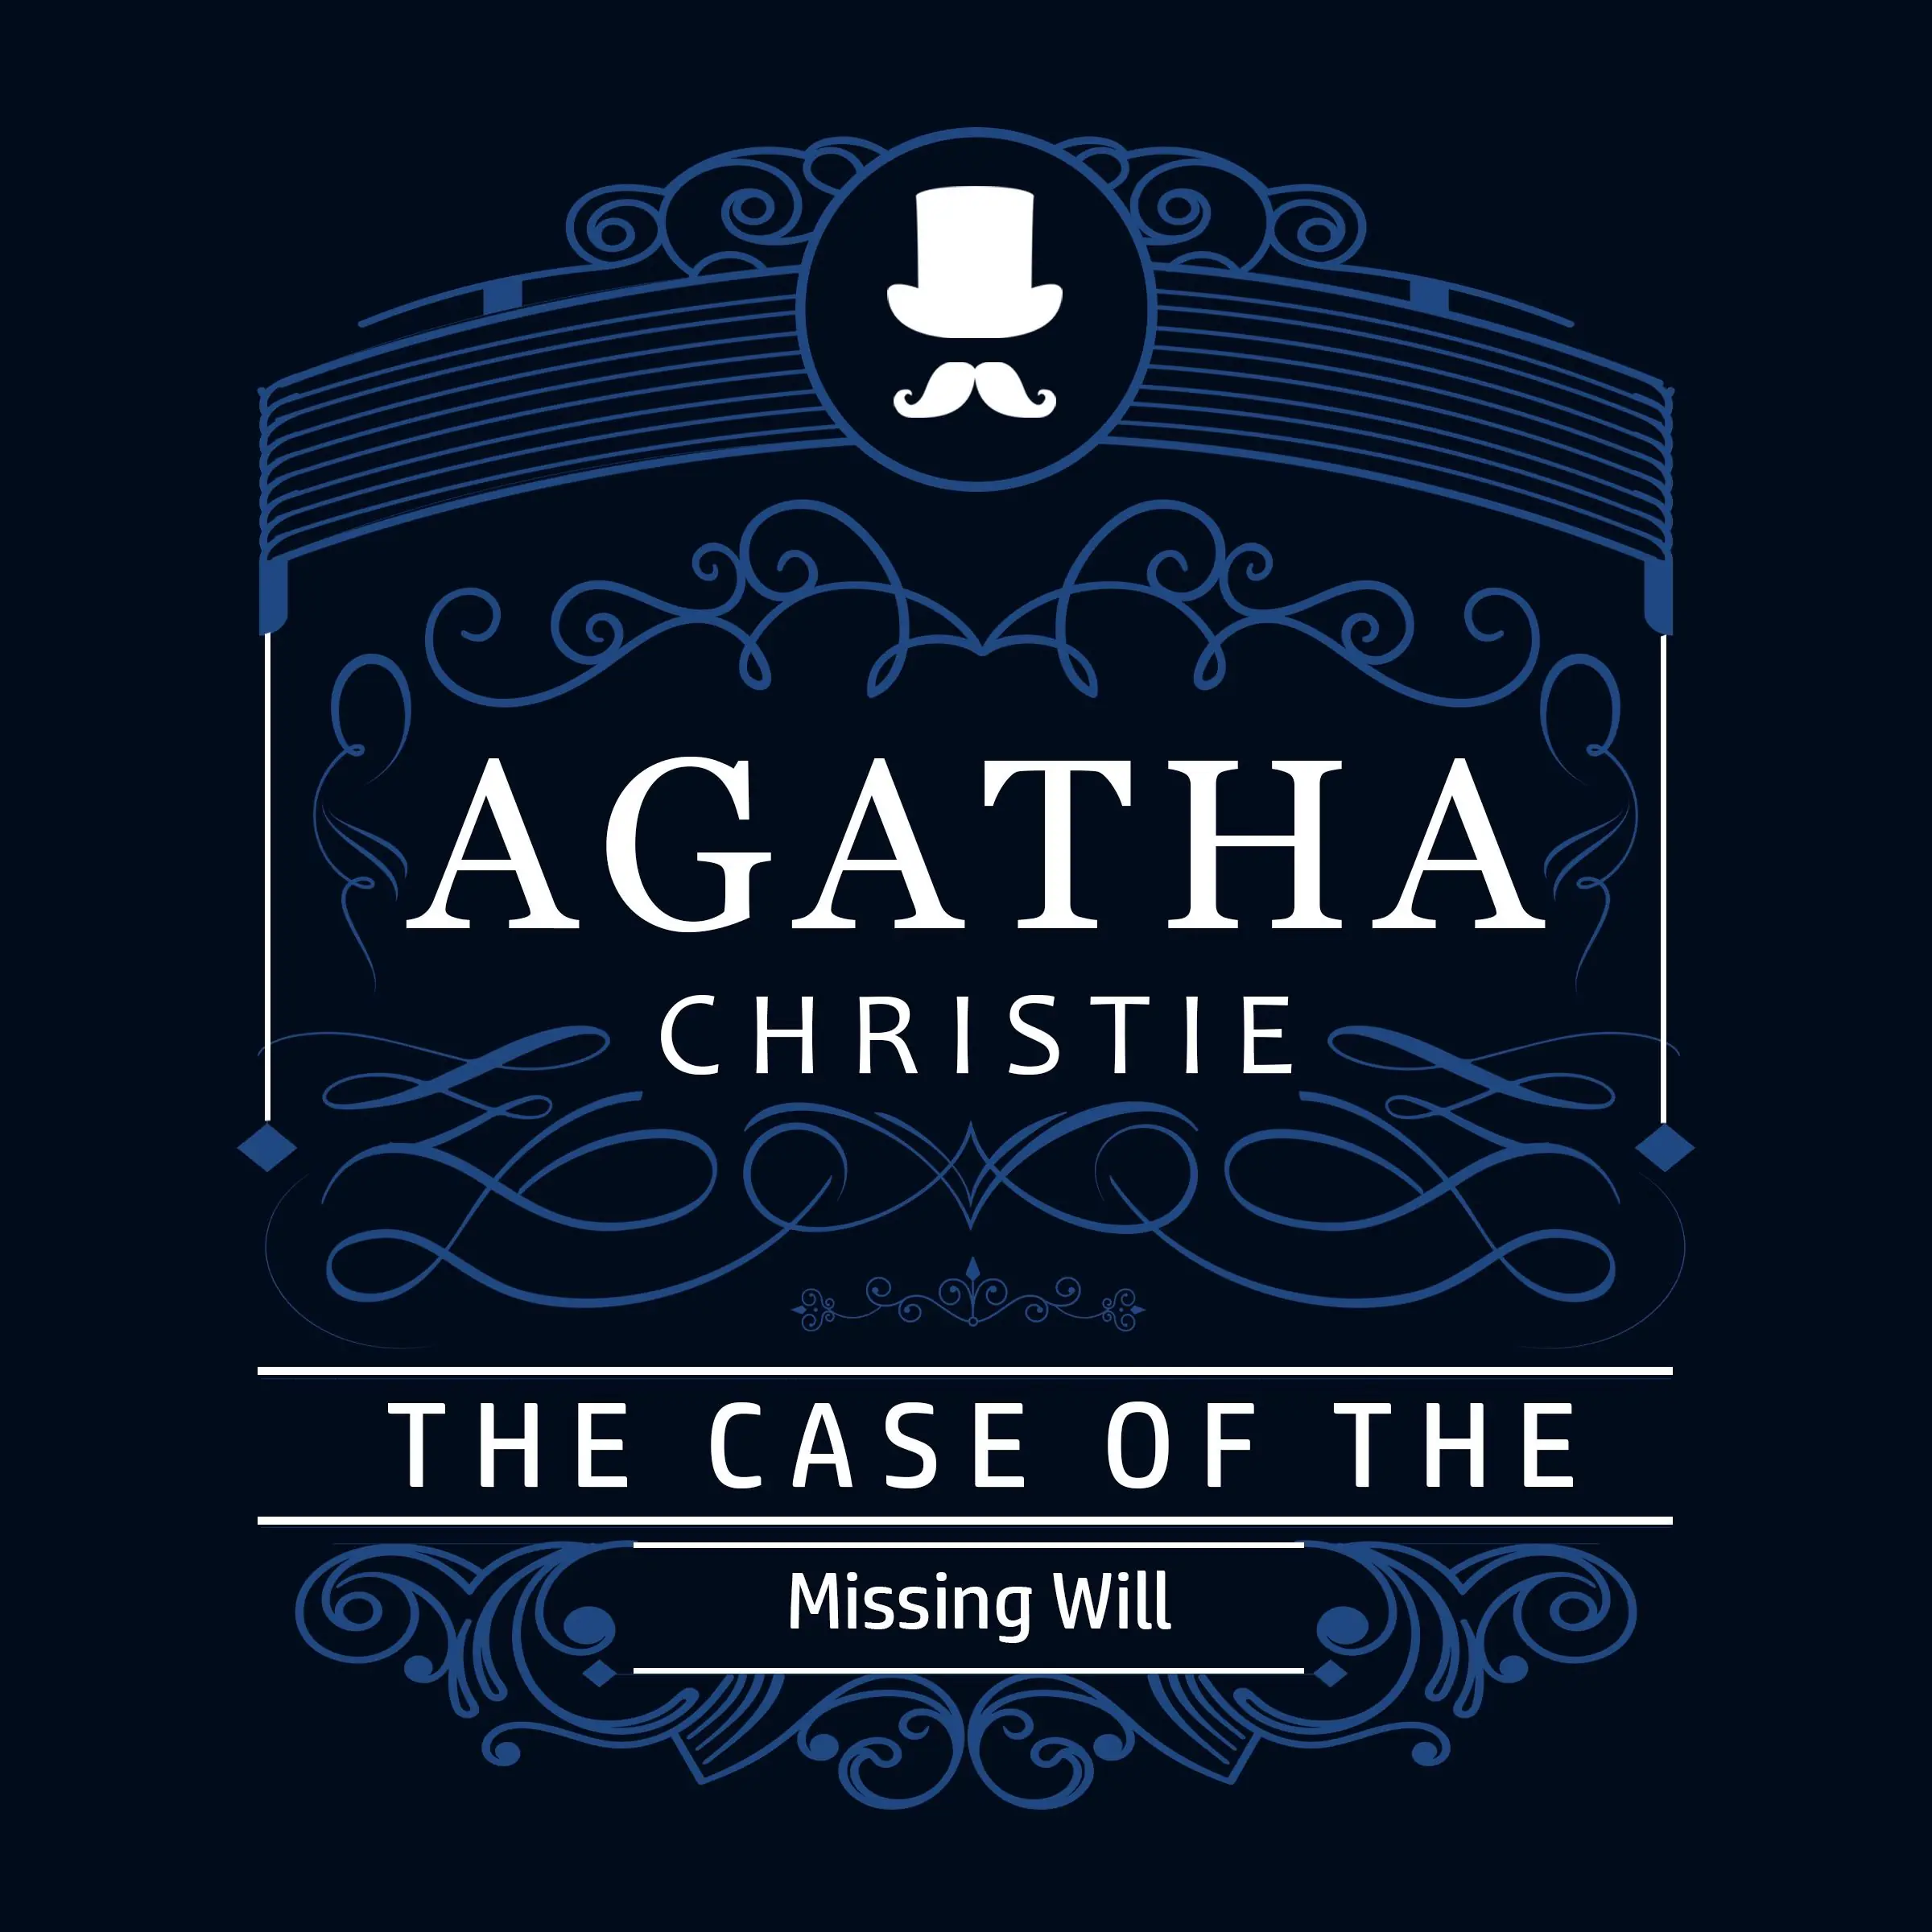 The Case of the Missing Will (Part of the Hercule Poirot Series)